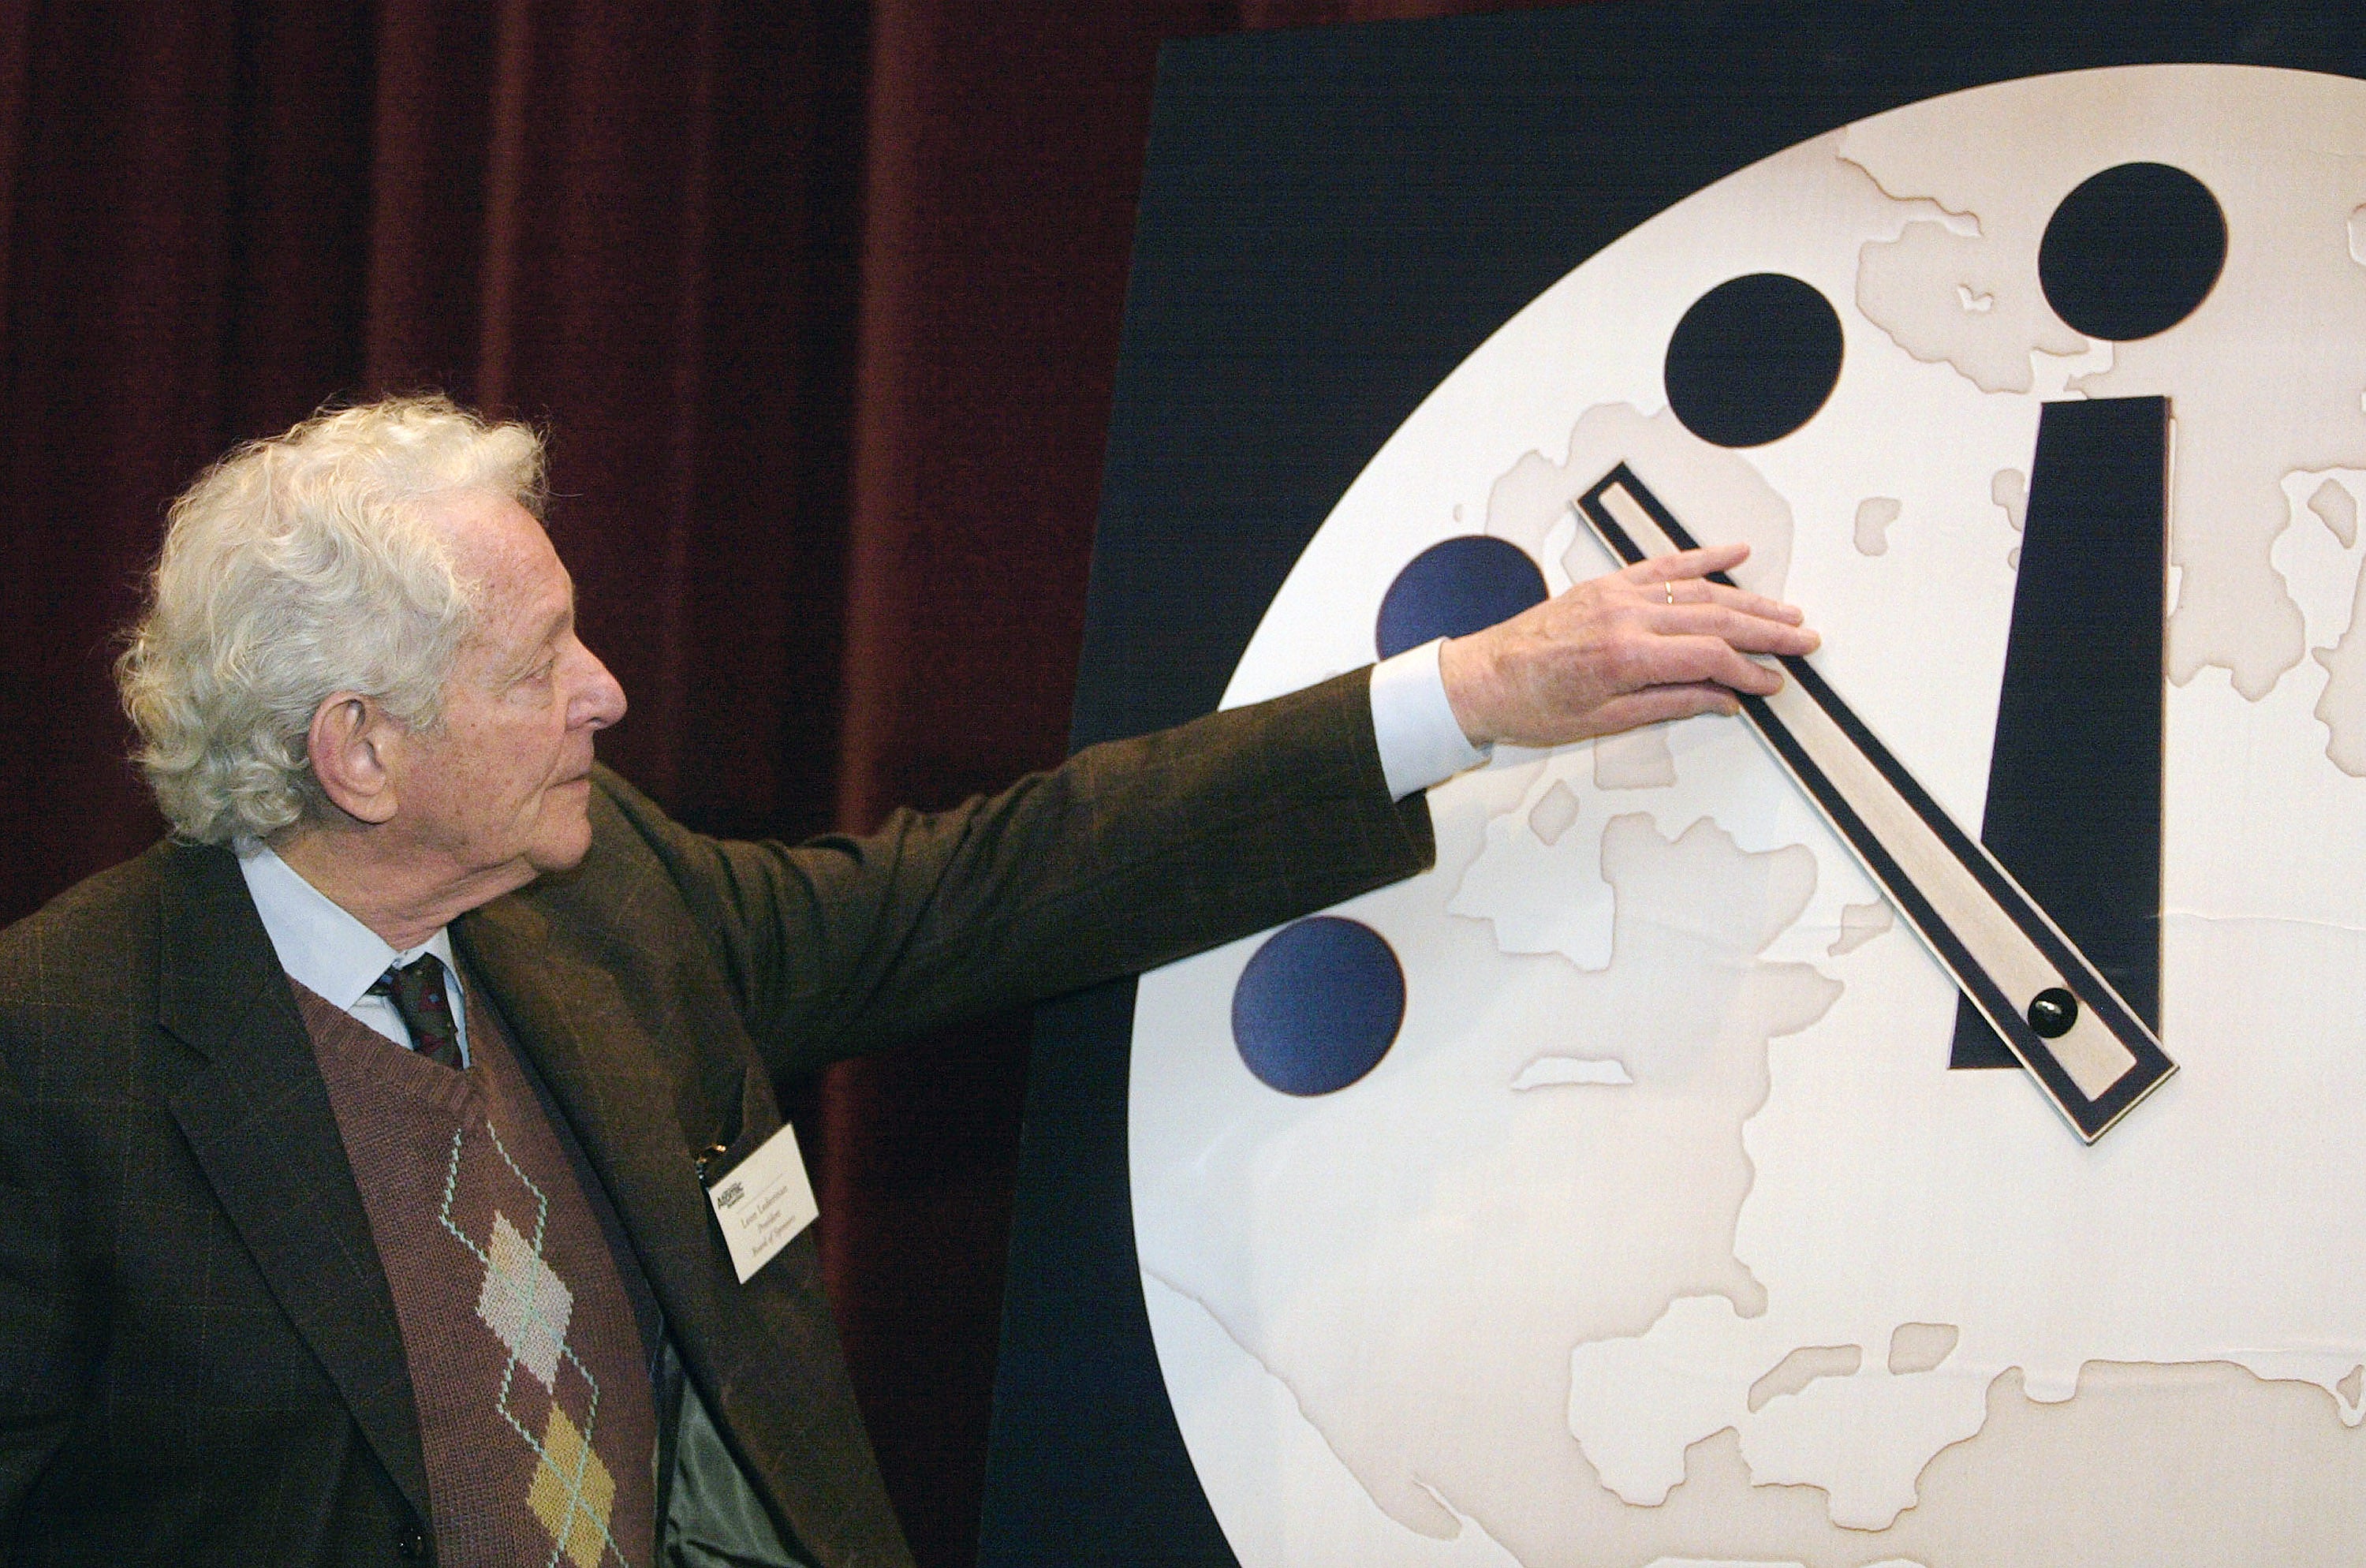 According to the scientists behind the doomsday clock, we are now 100 seconds to midnight... AKA the end of the world